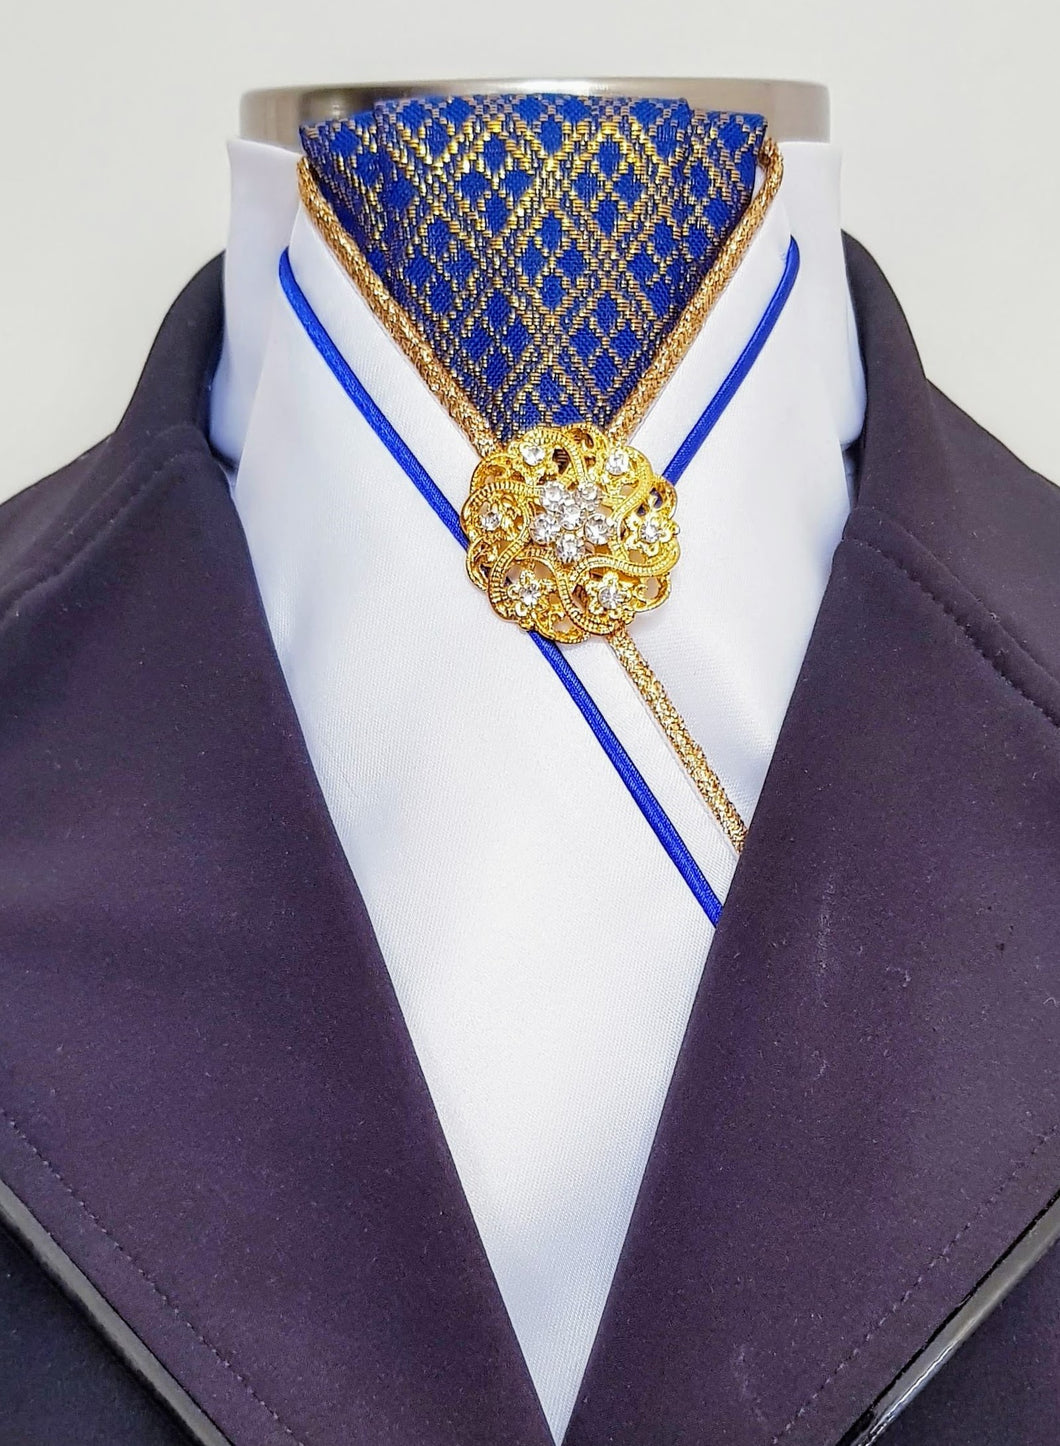 ERA MARLO STOCK TIE - White satin, royal blue/gold brocade with 2 piping & brooch